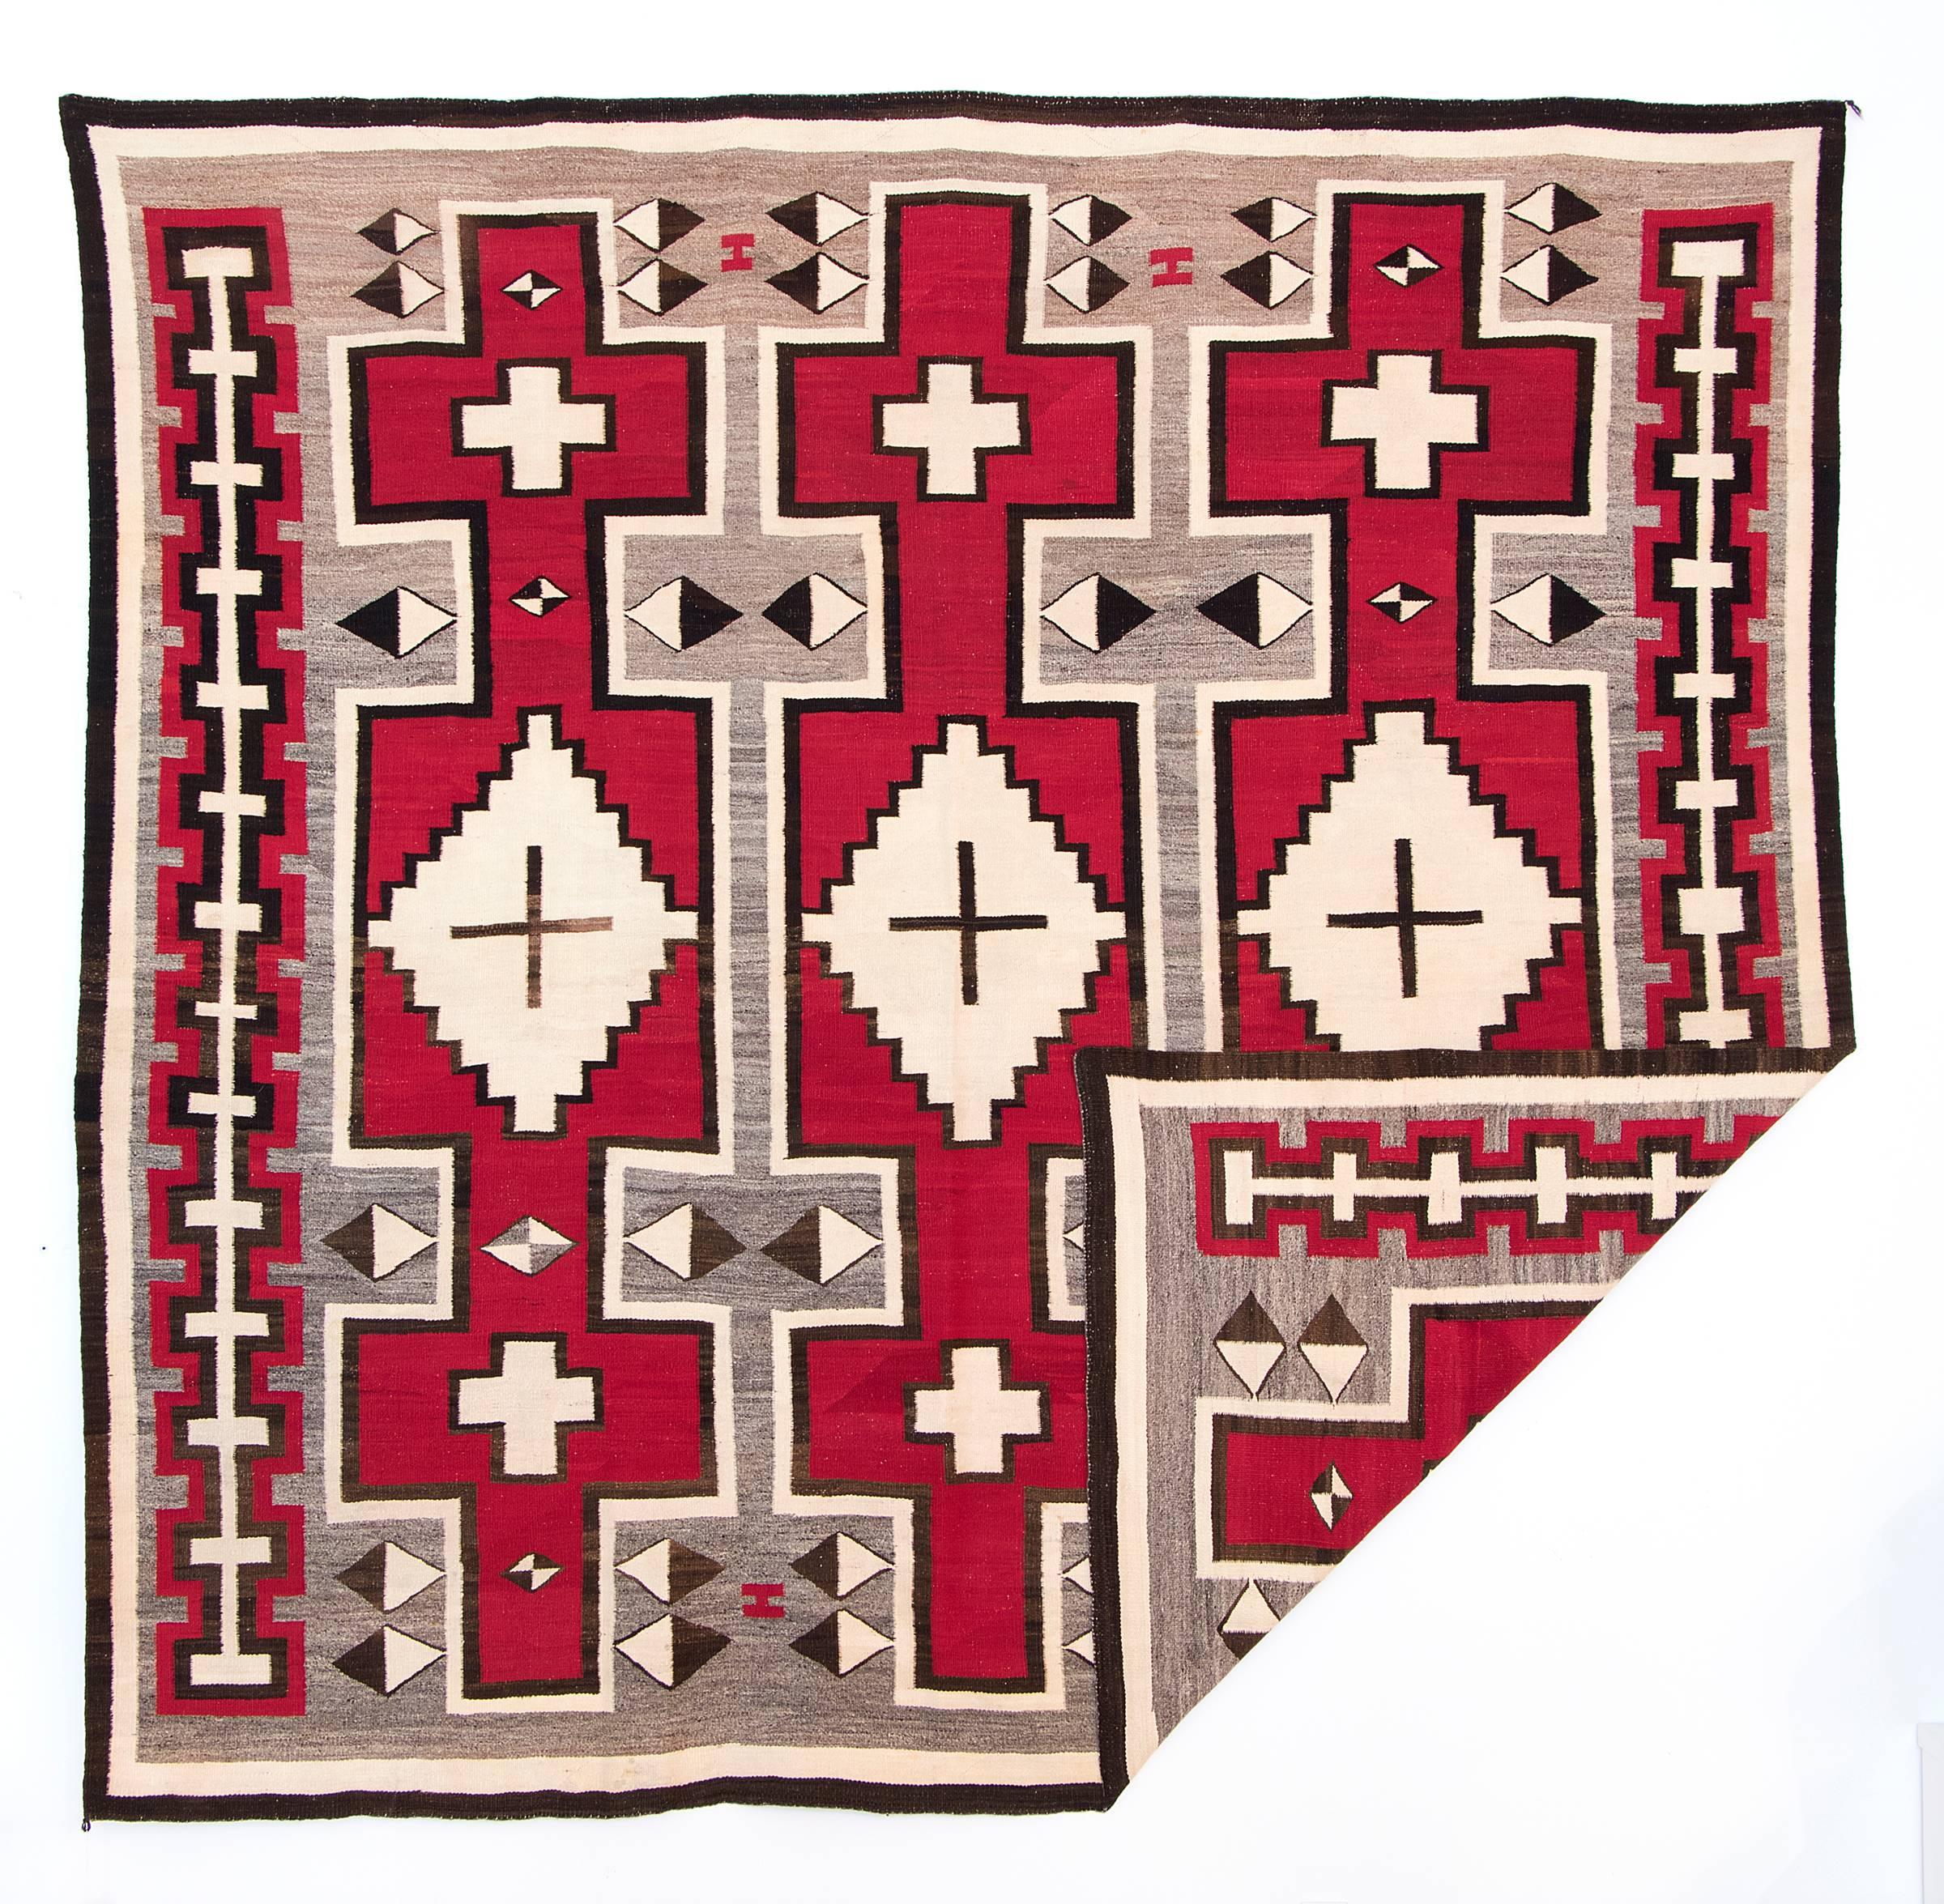 An exceptional early Trading Post era rug with pictorial elements including crosses and diamond motifs. Expertly woven by a Native American (Navajo) weaver for the Ganado Trading Post (founded by John Lorenzo Hubbell at Ganado, Arizona, in 1876).